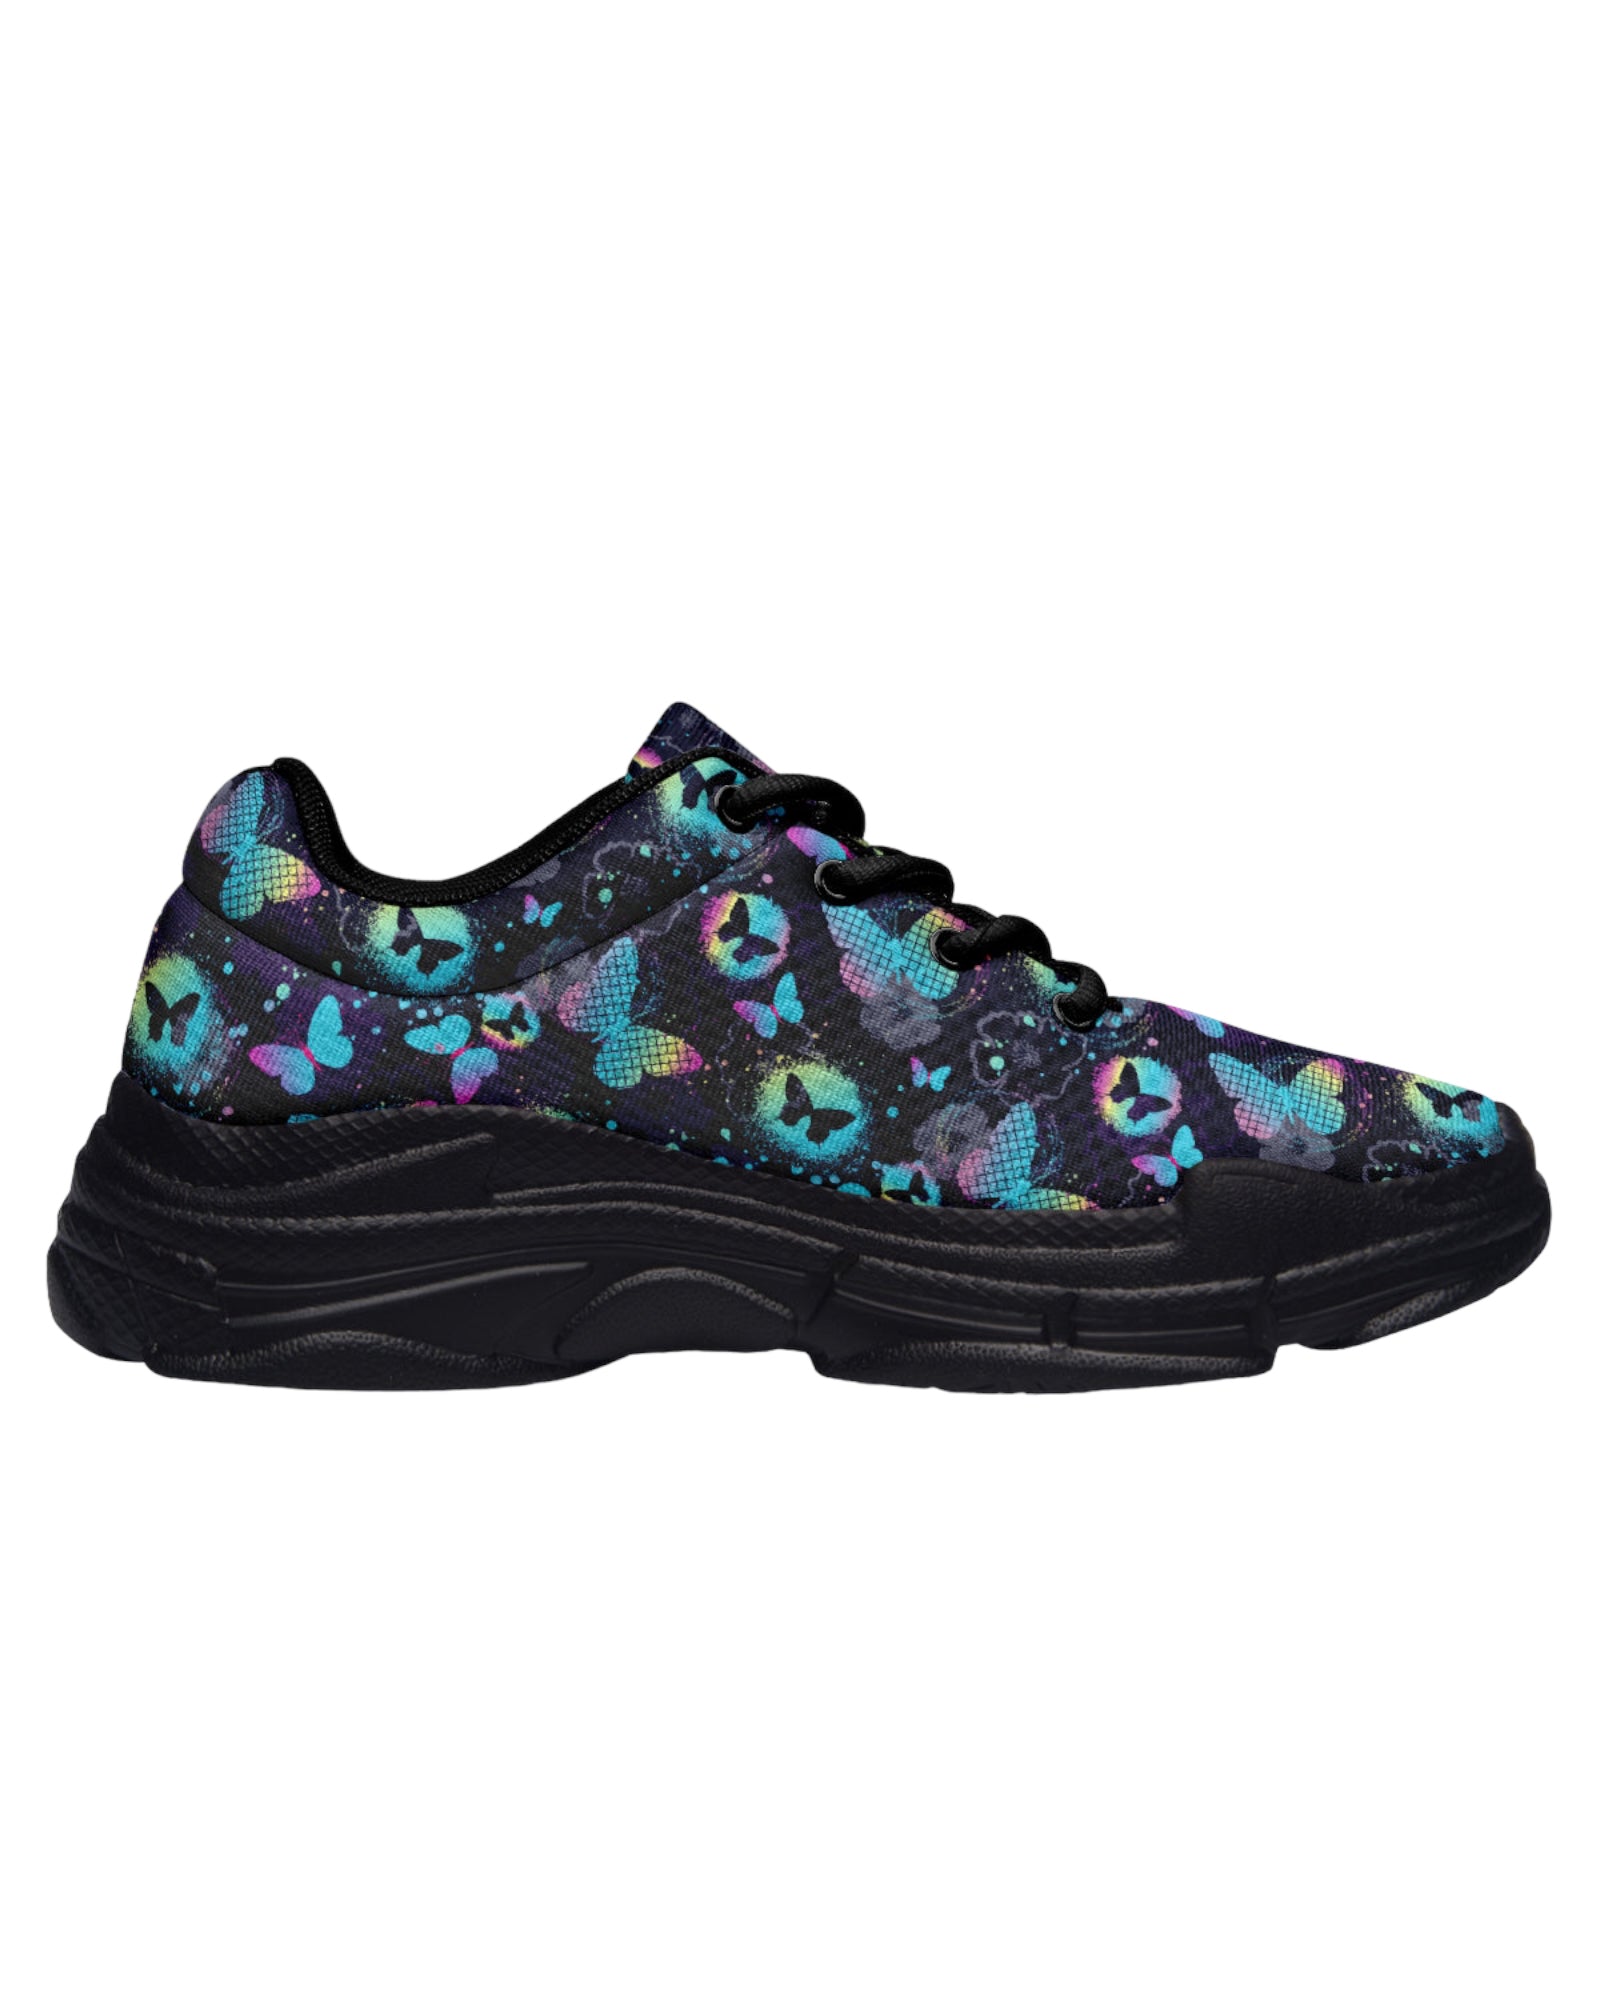 Painted Butterfly Chunky Festival Sneakers